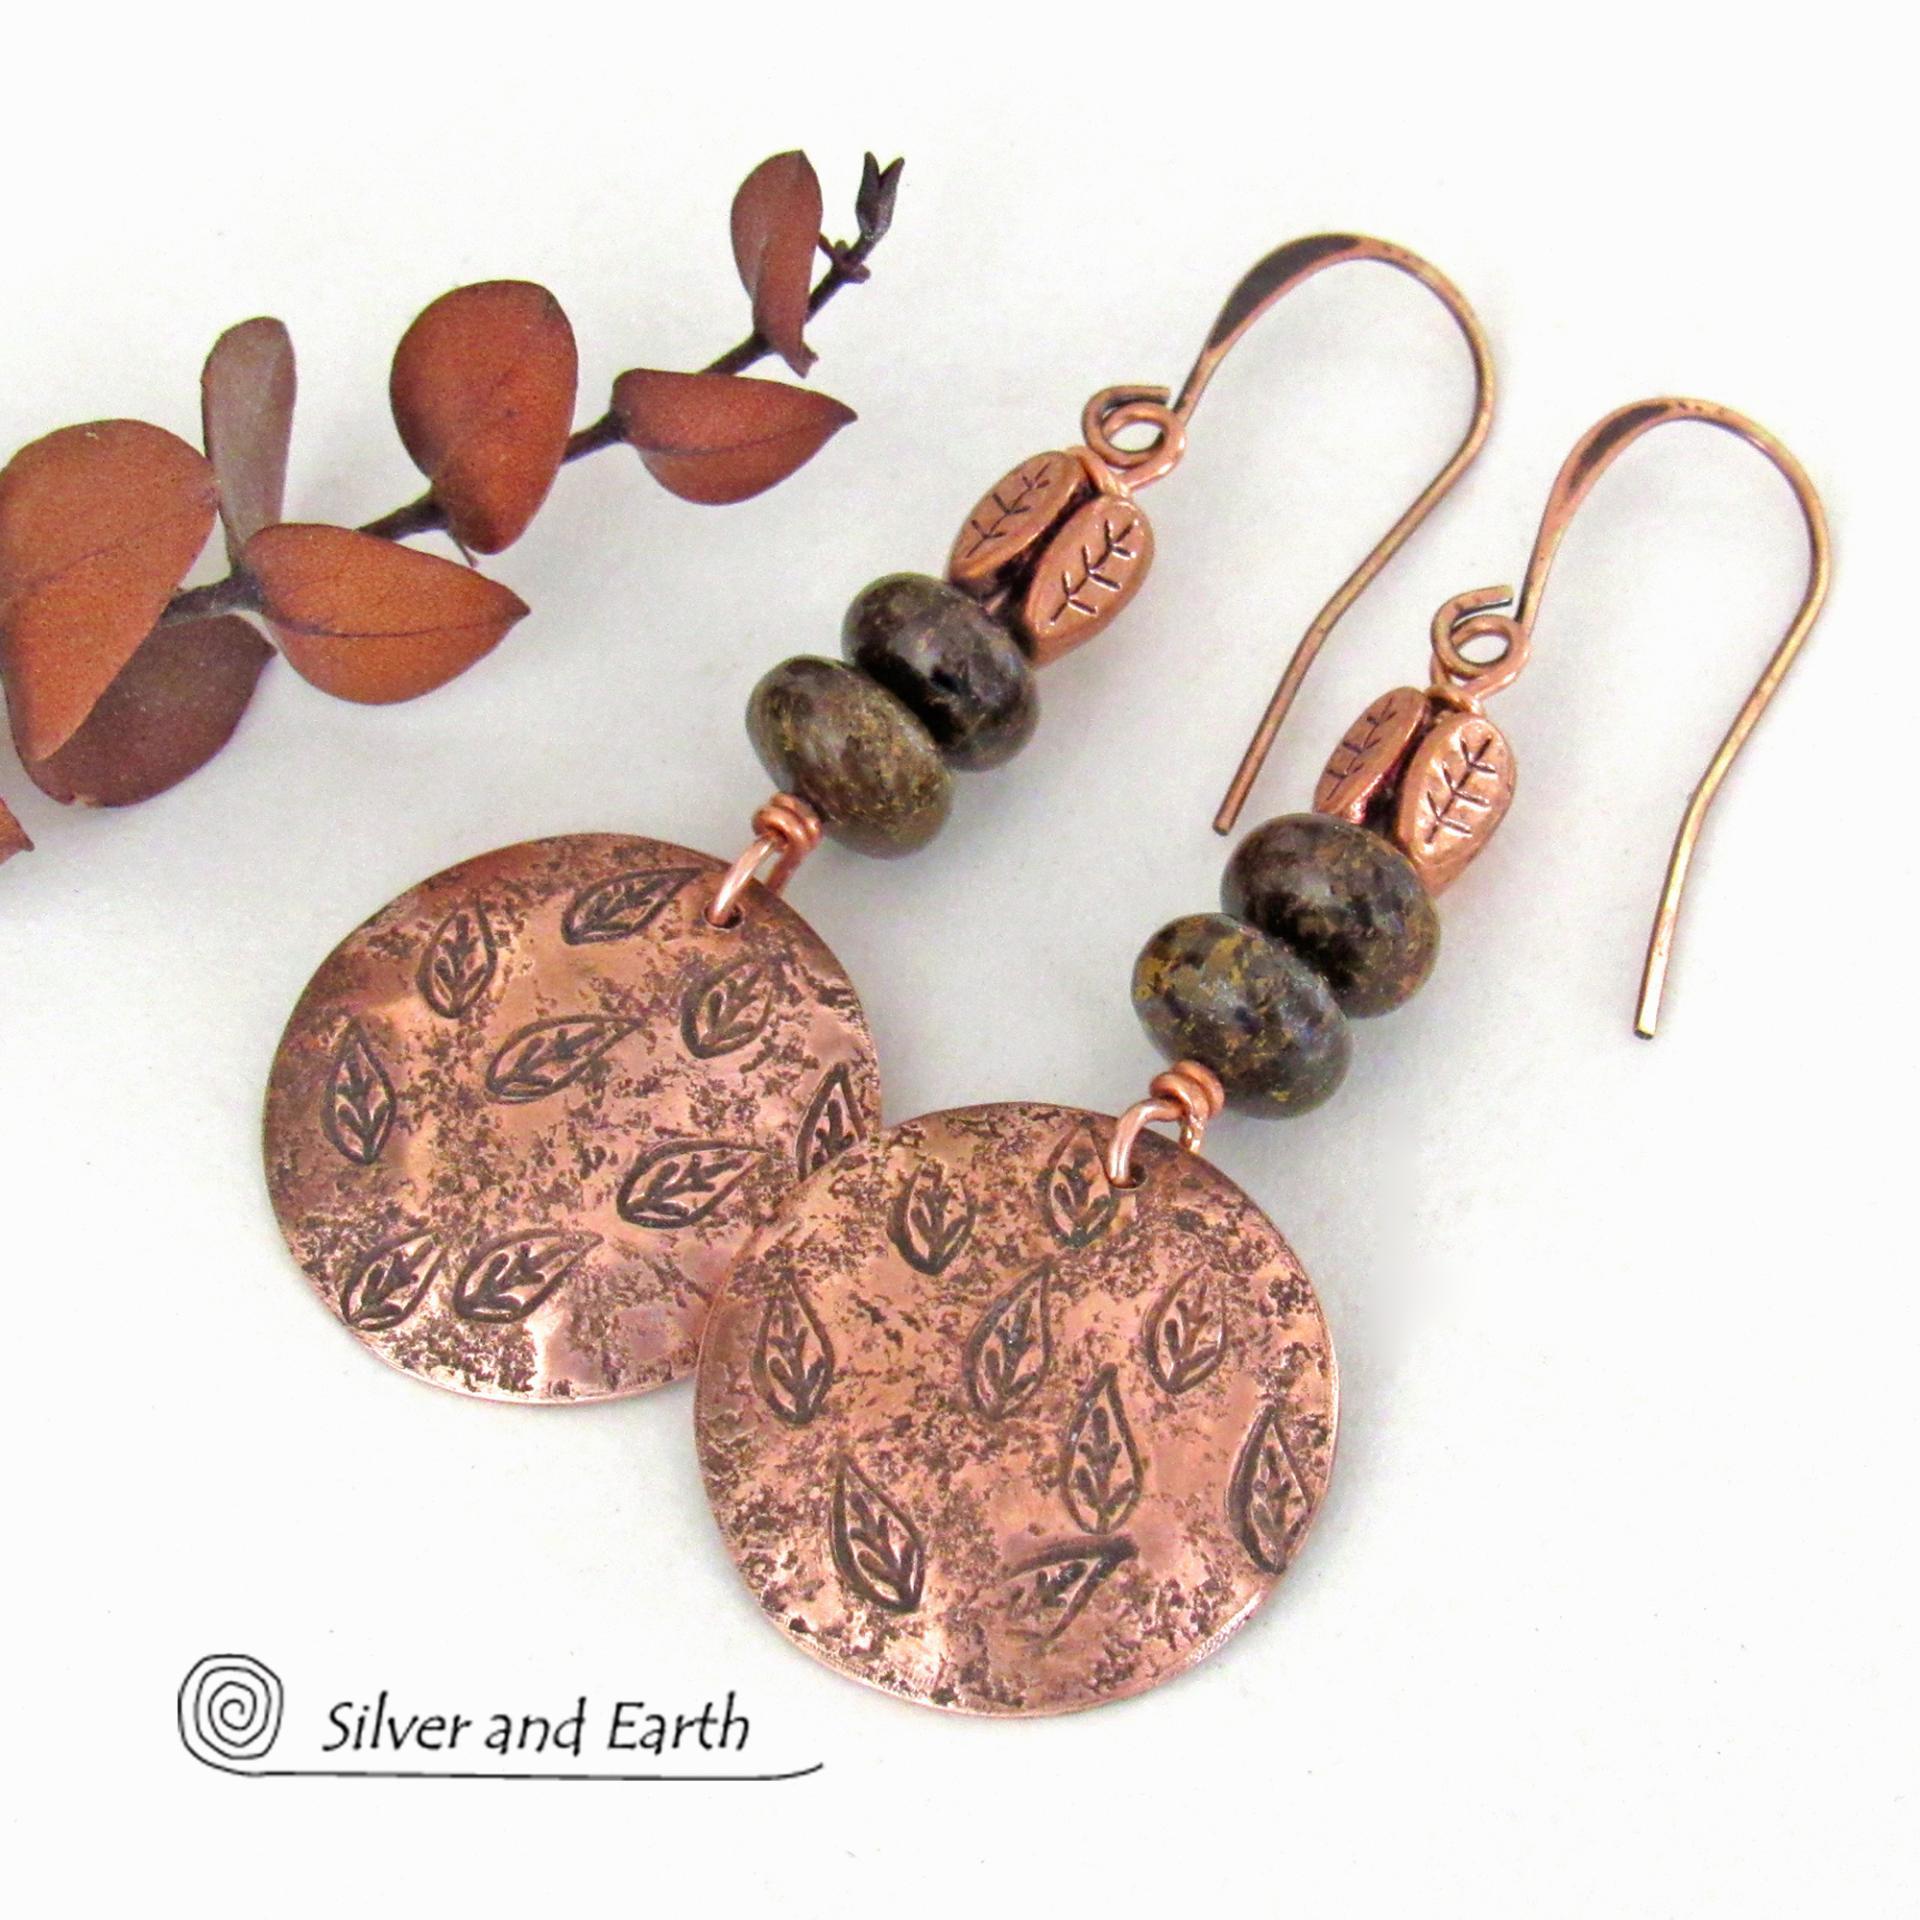 Copper Earrings with Hand Stamped Leaves & Brown Bronzite Stones - Artisan Handmade Earthy Nature Jewelry Gifts for Women